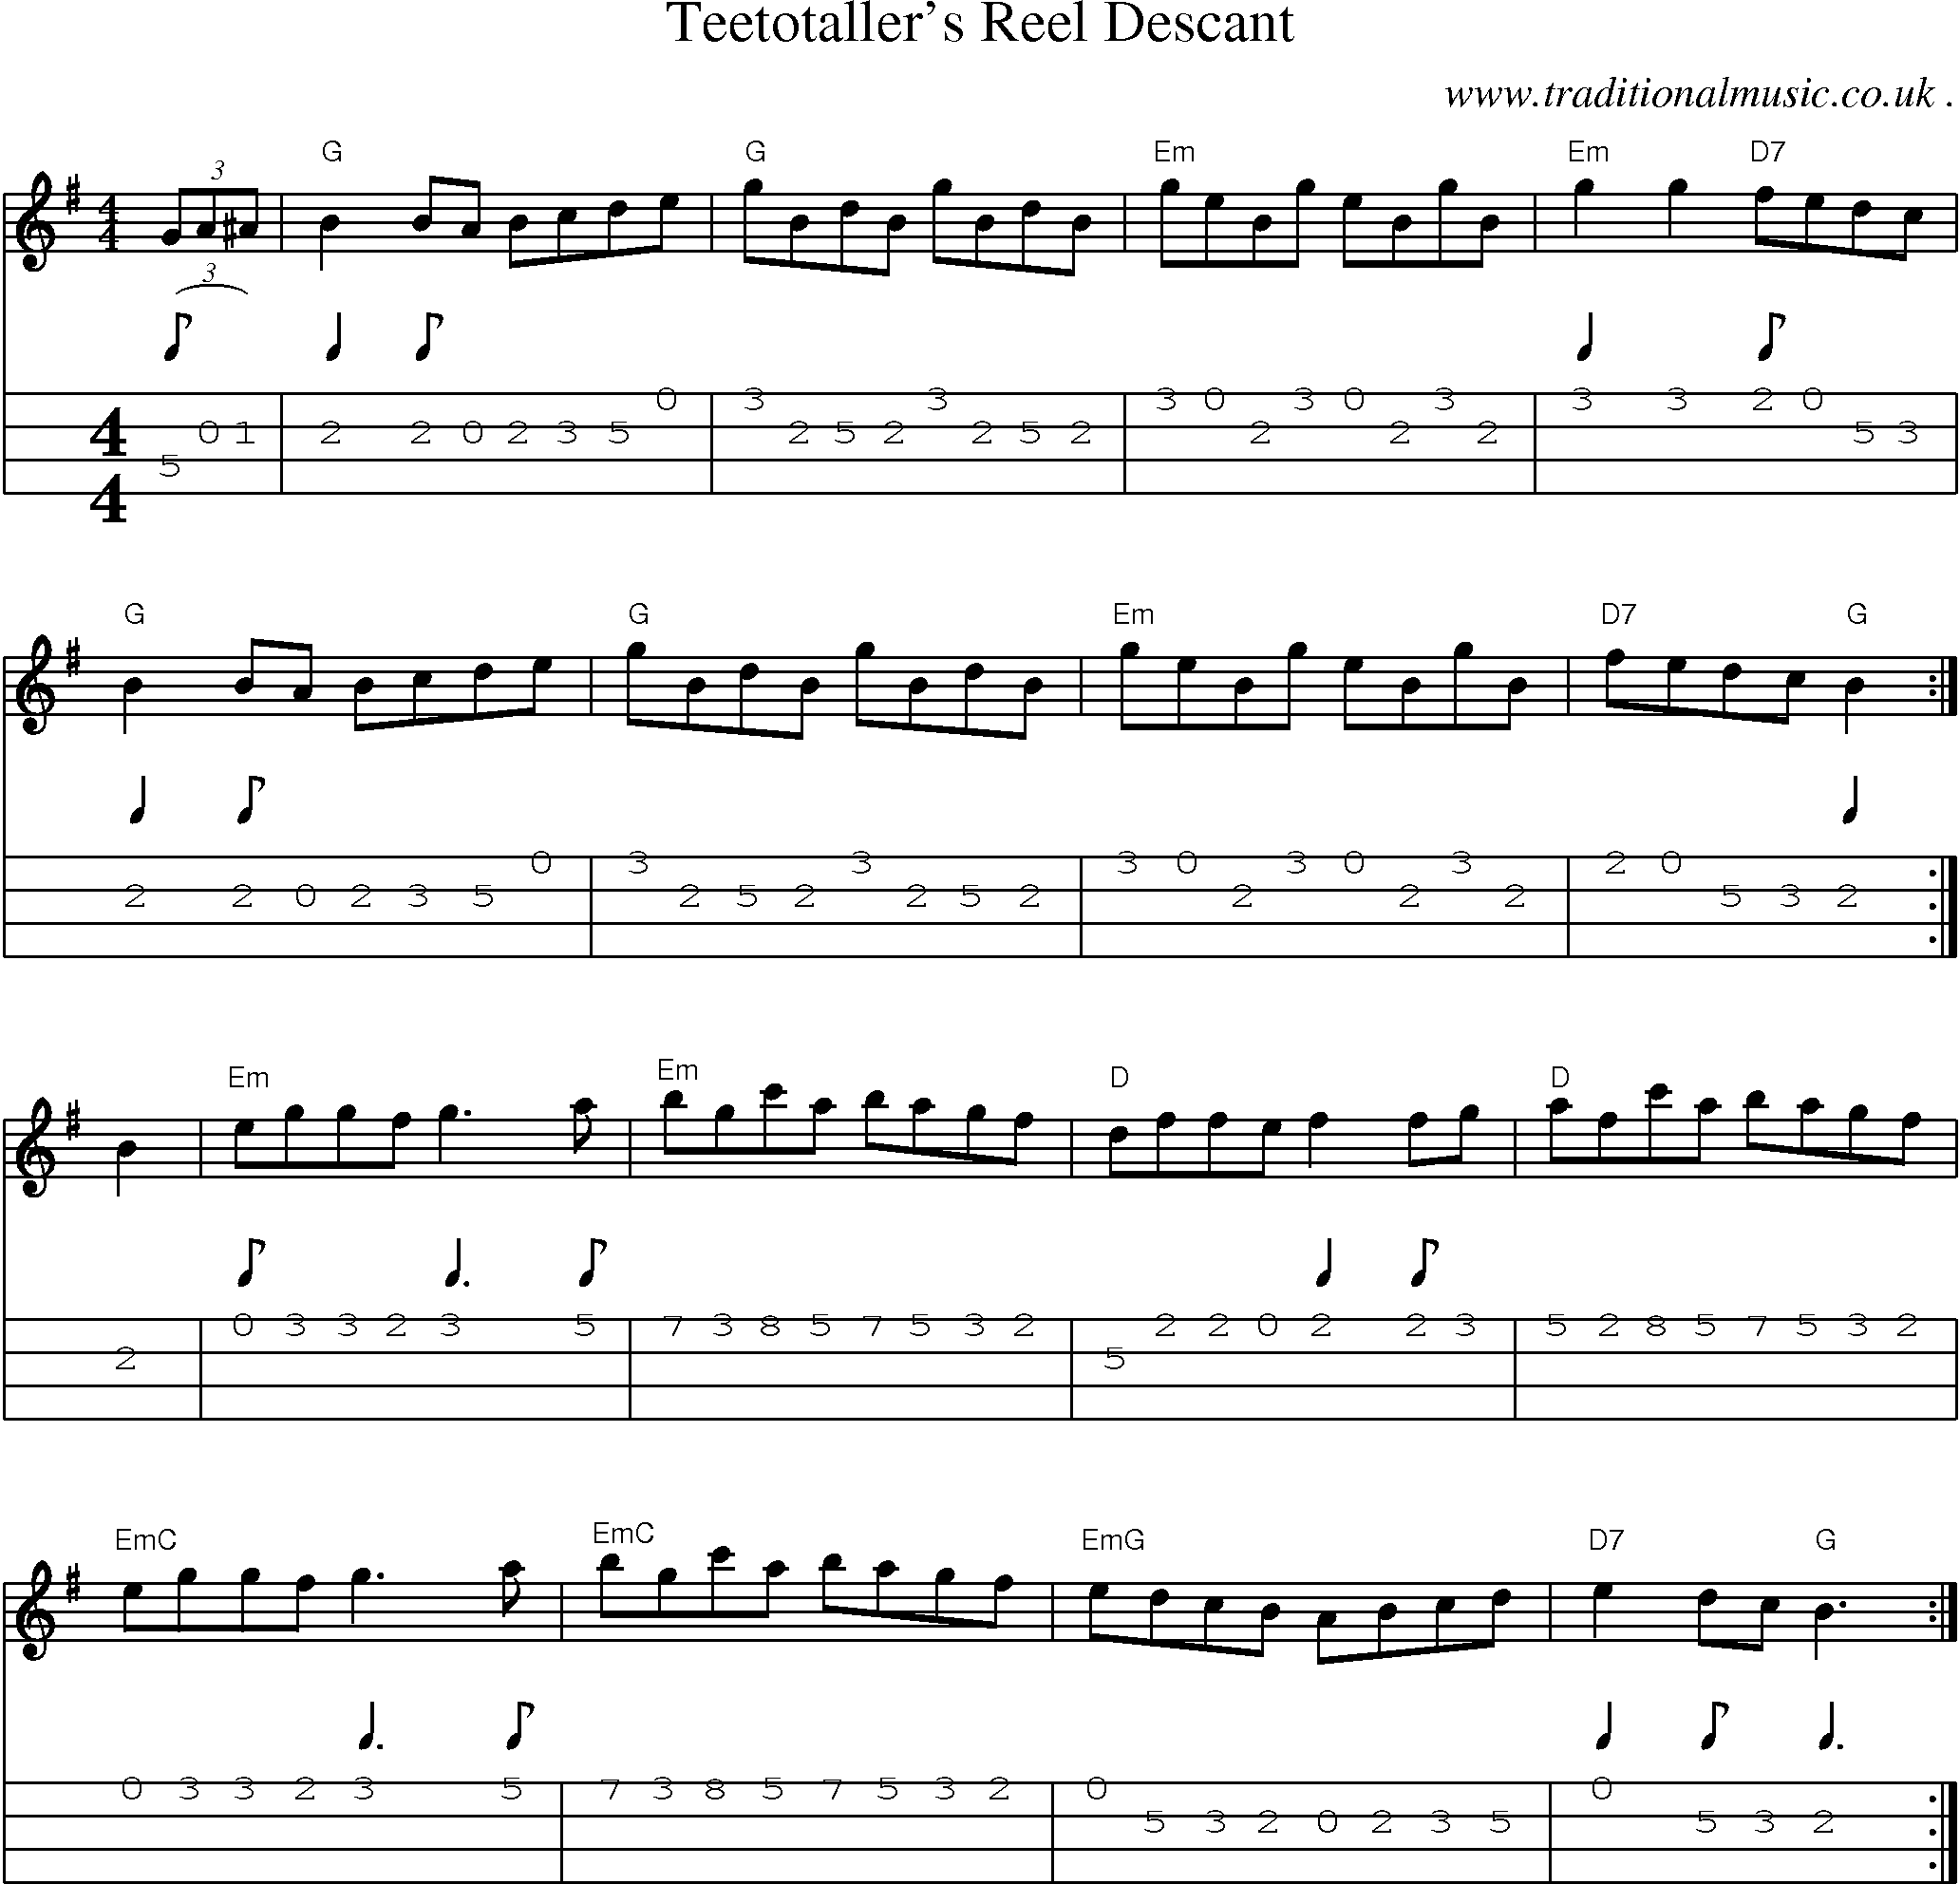 Sheet-Music and Mandolin Tabs for Teetotallers Reel Descant